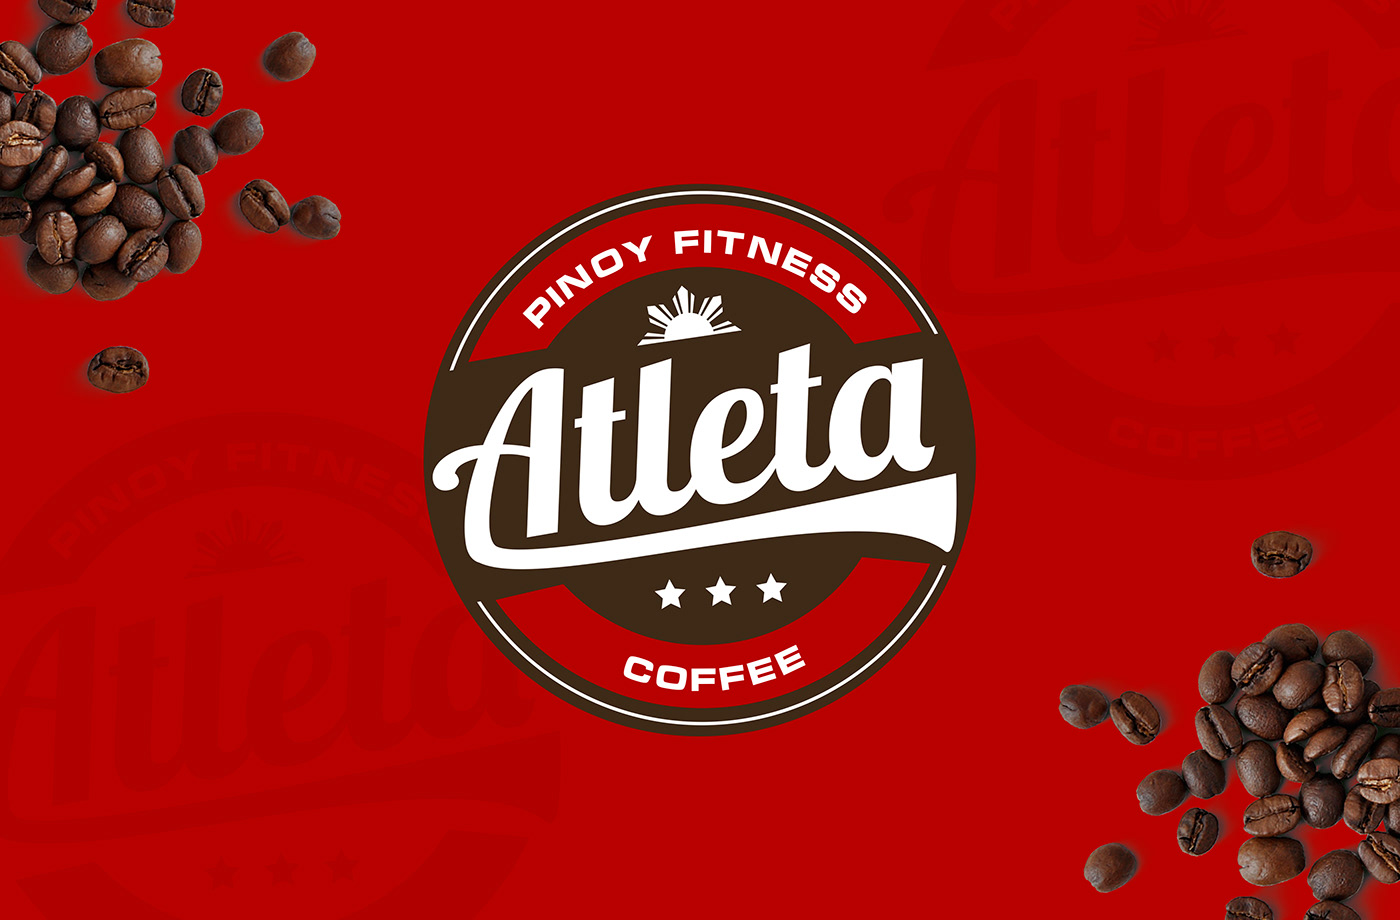 atheletic Coffee coffee fitness coffee label coffee packaging fitness philippines Pinoy Fitness vintage